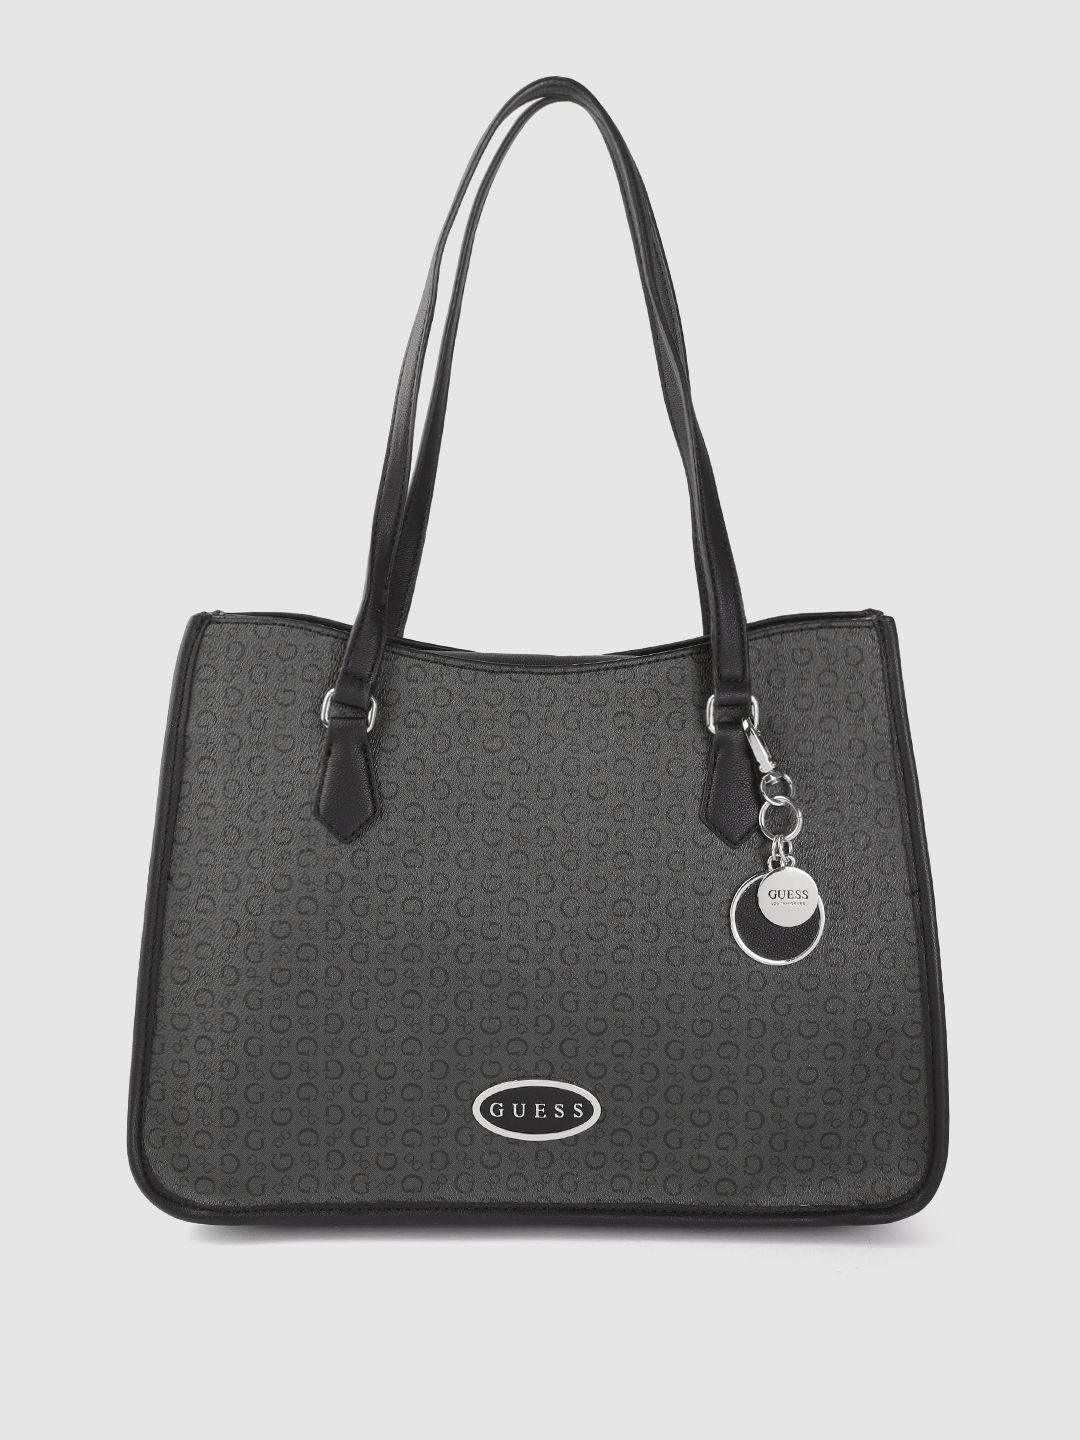 GUESS Women Charcoal Grey & Black Brand Logo Print Structured Shoulder Bag Price in India